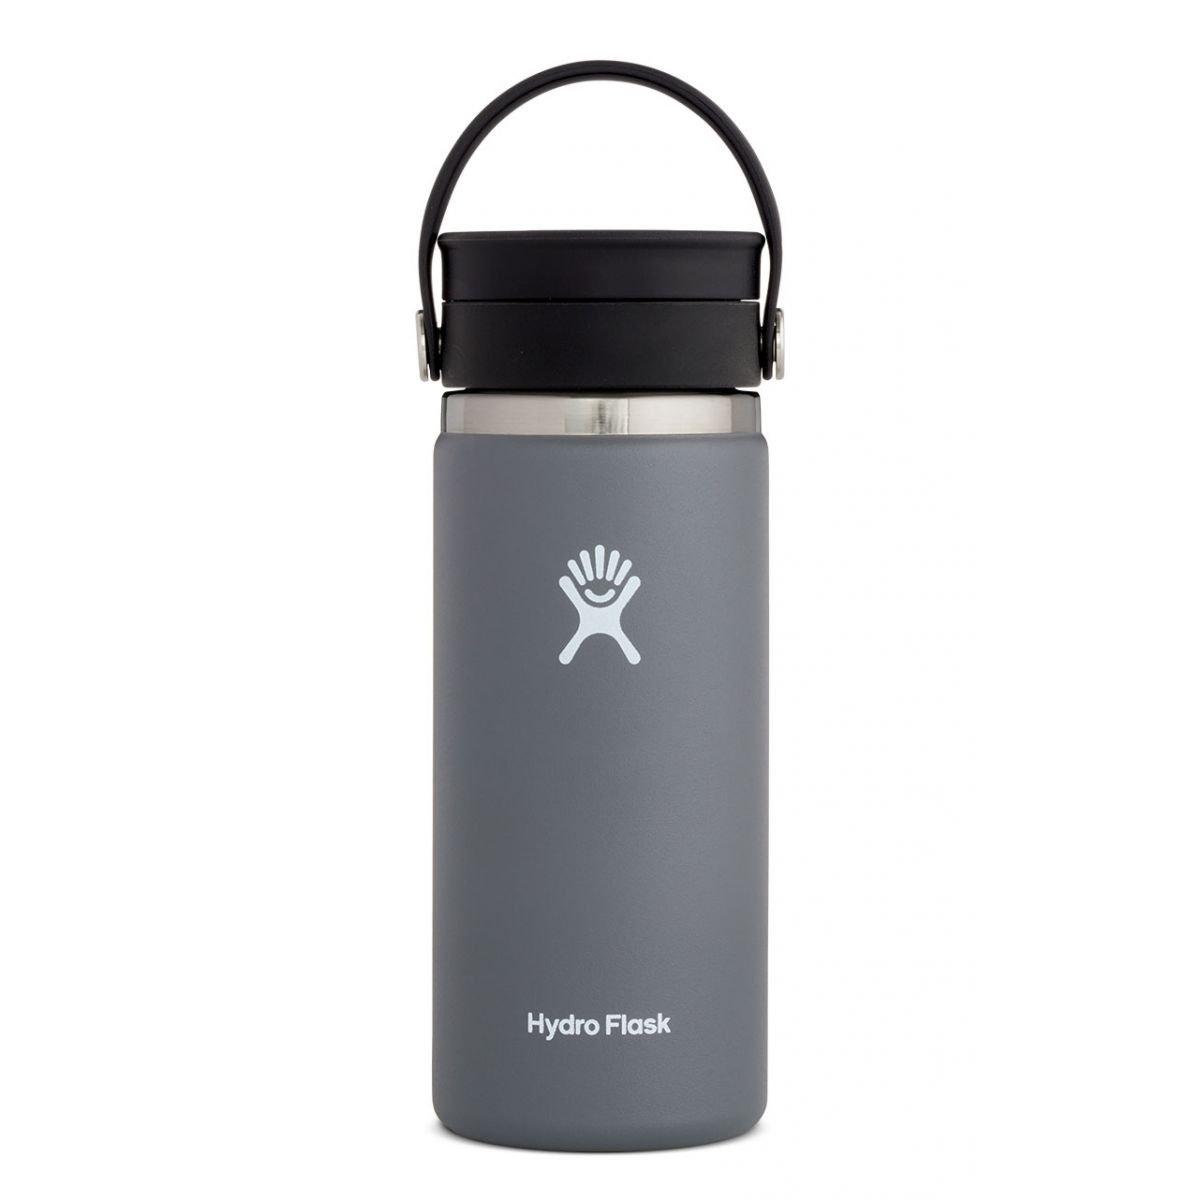 Hydro Flask 16oz Wide Mouth Coffee